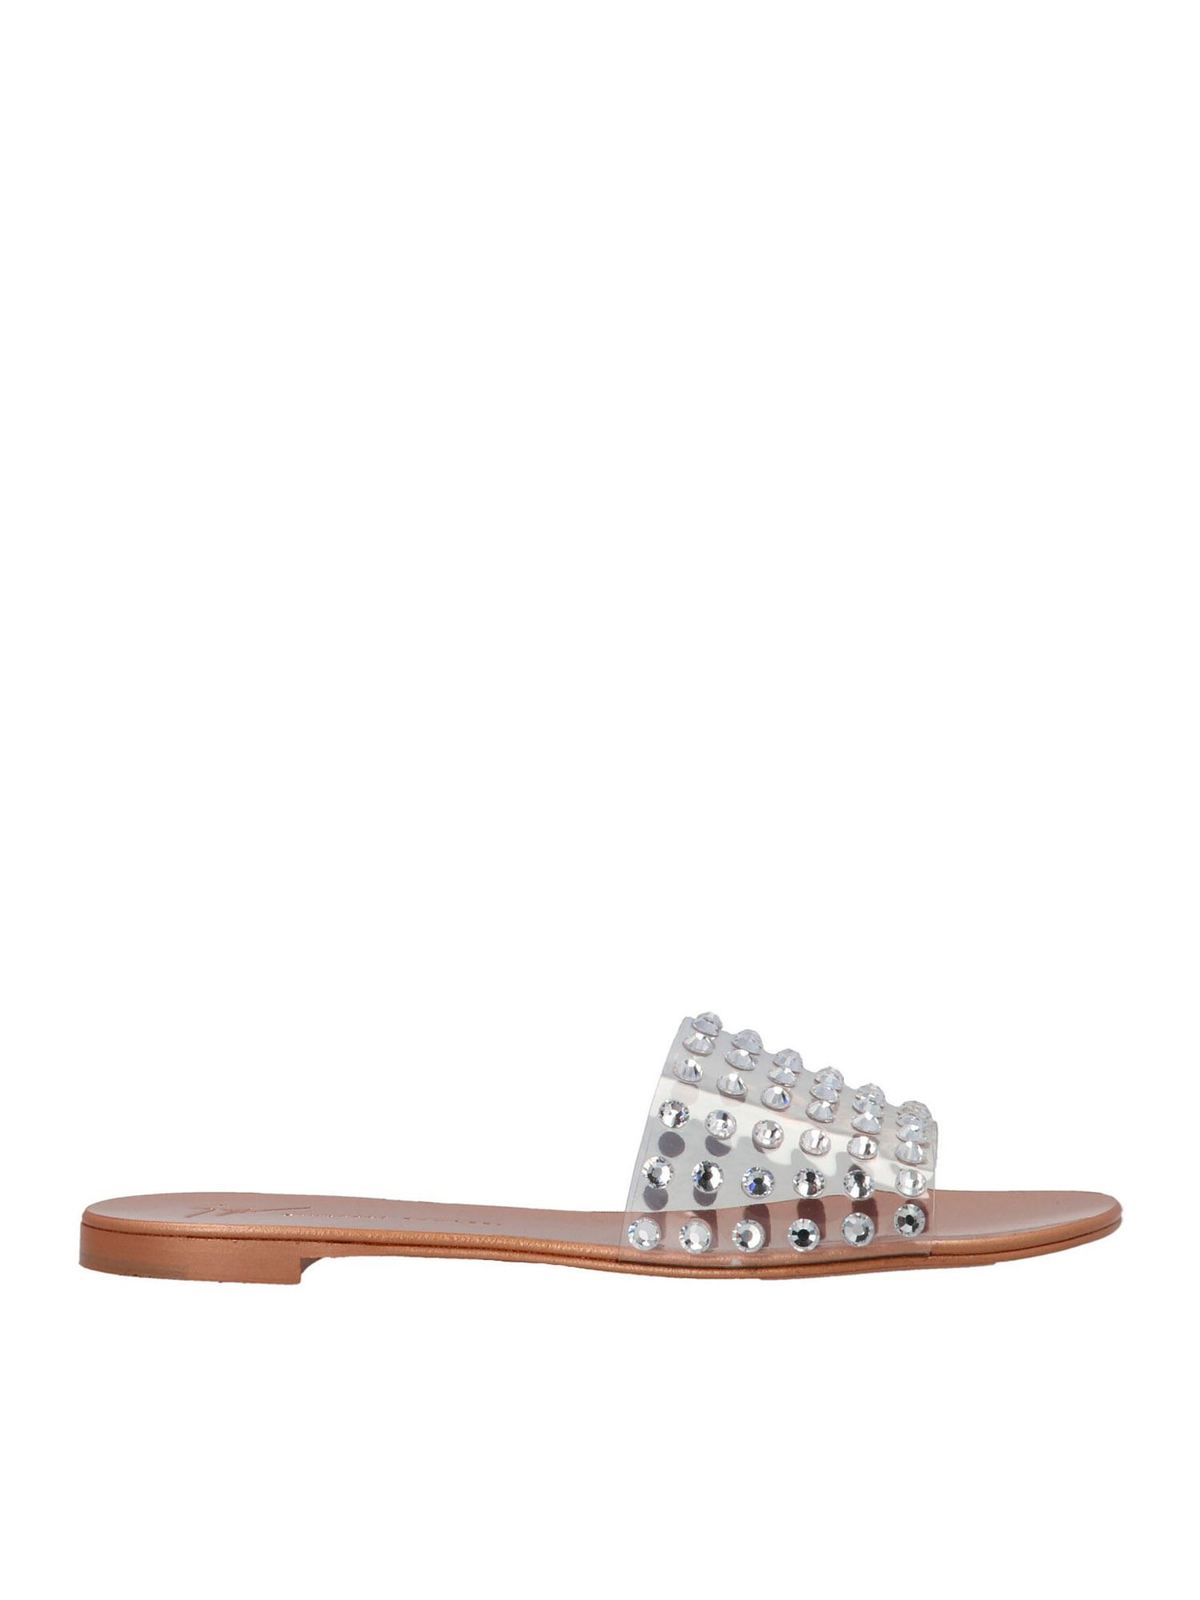 GIUSEPPE ZANOTTI CRYSTAL LEATHER SLIDES IN SILVER COLOR